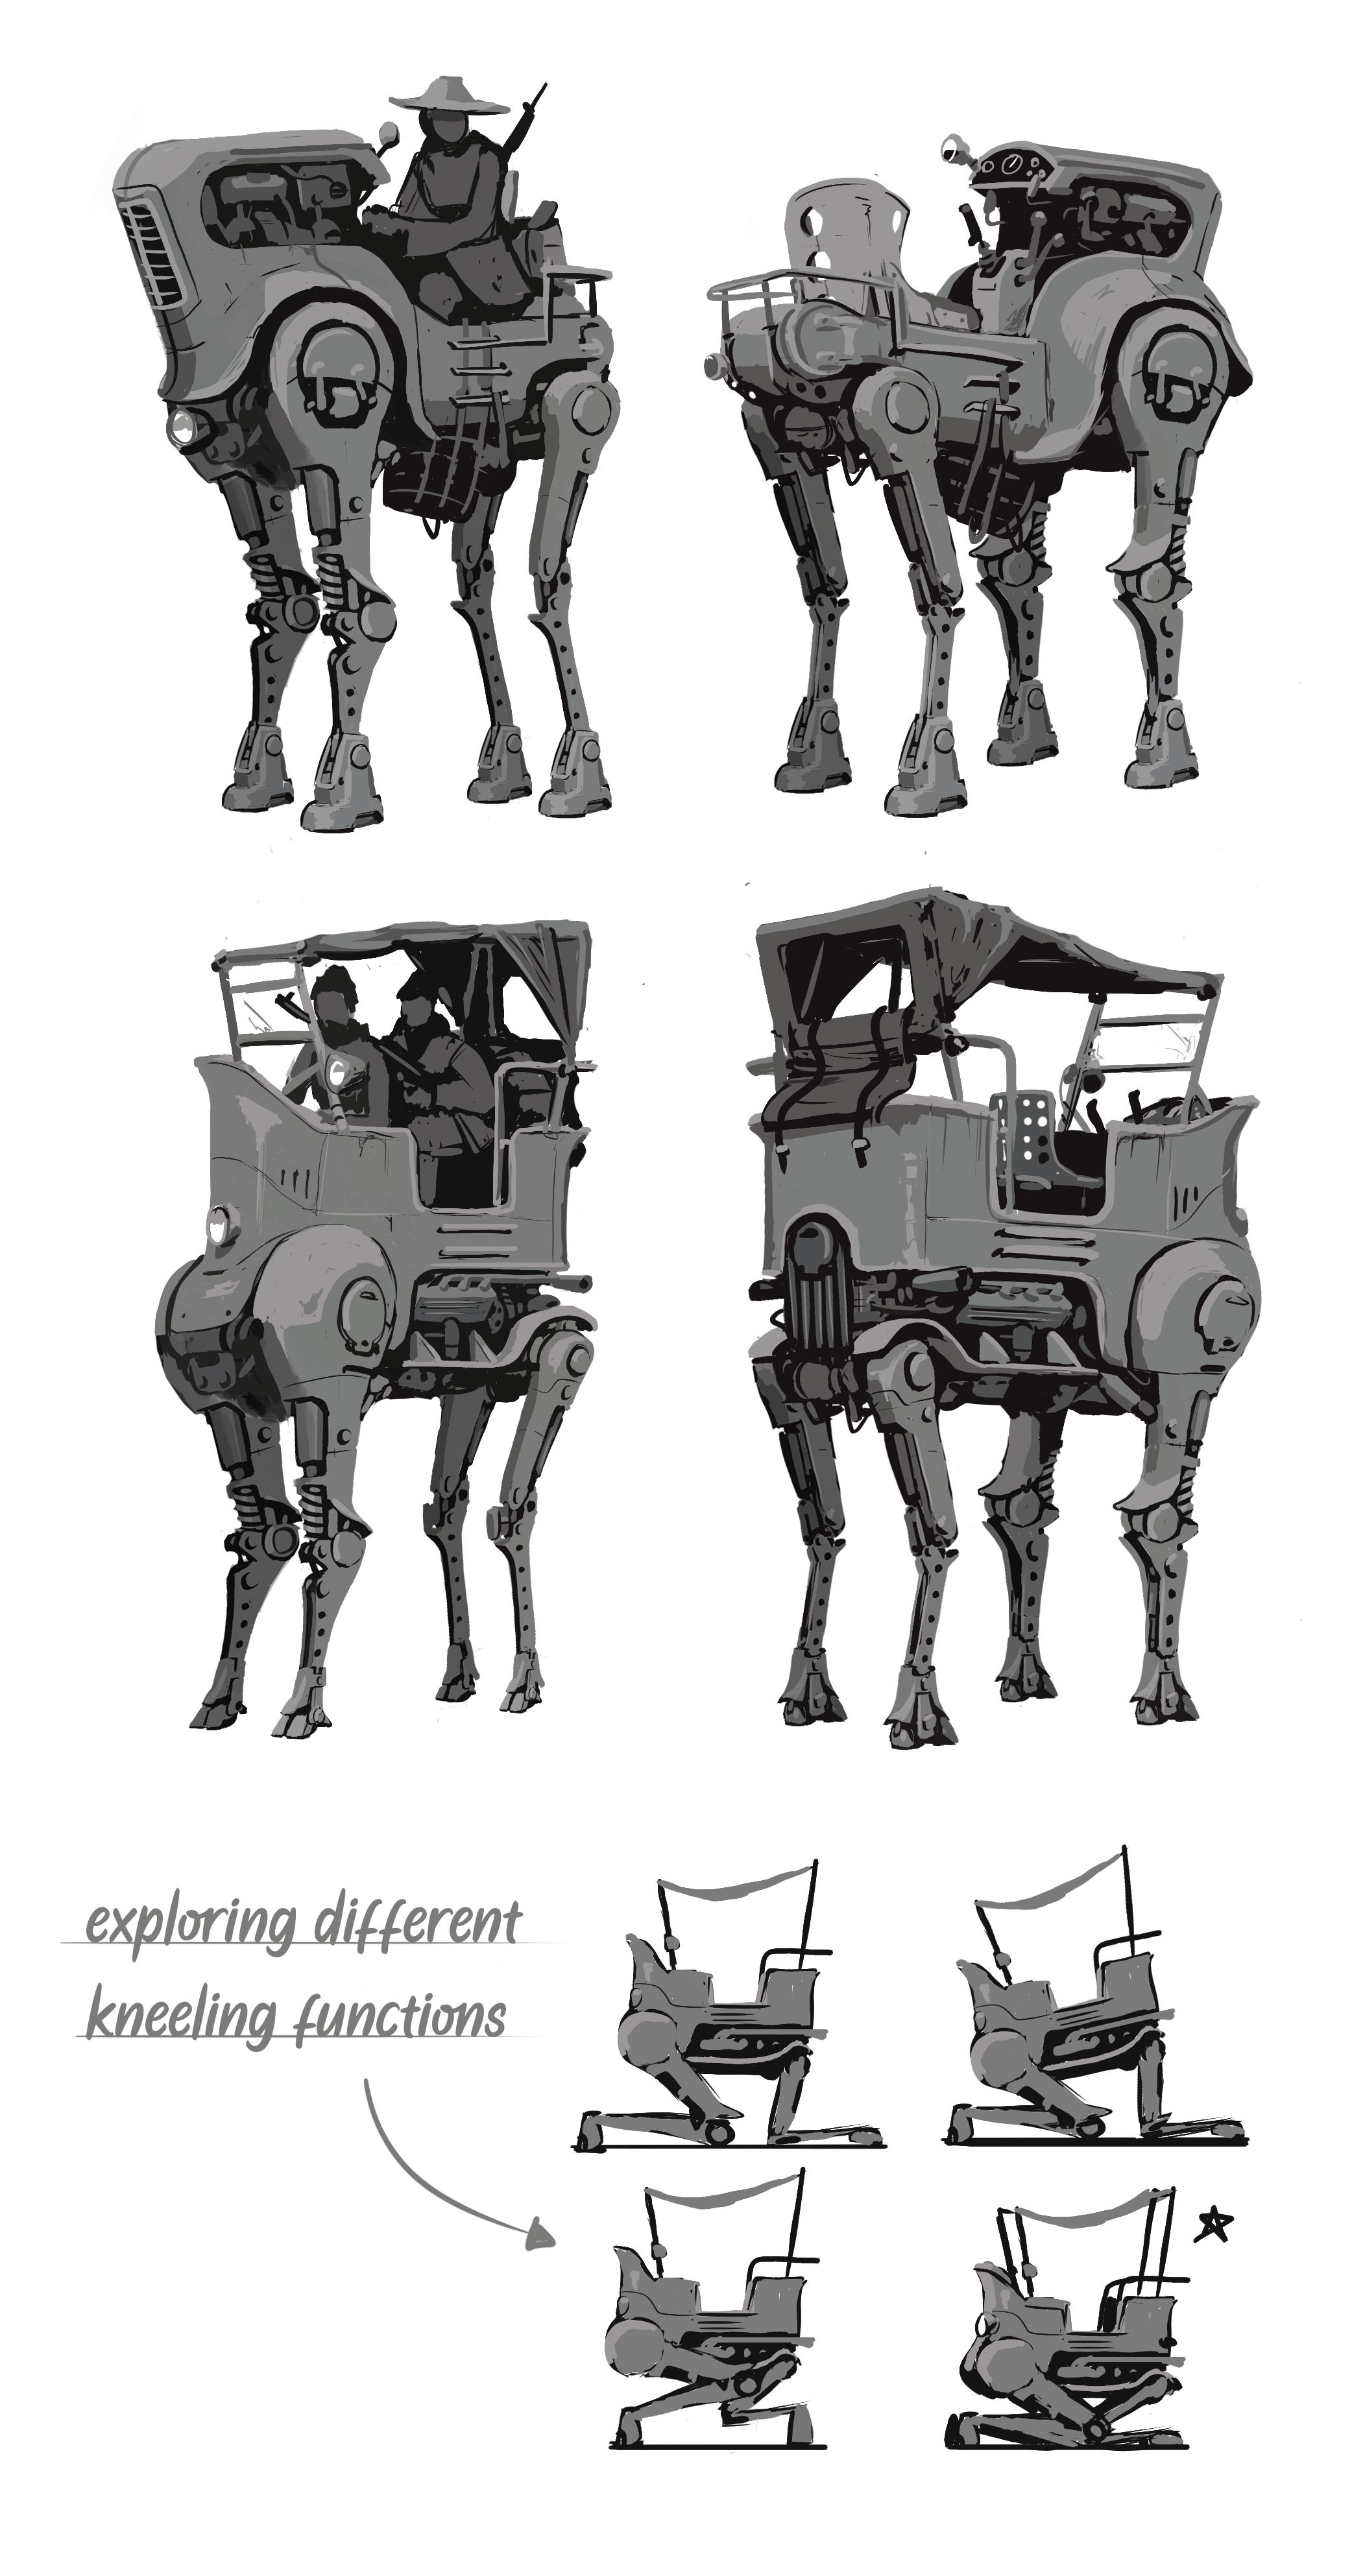 Refining my favorite two designs--one inspired by old tractors and the other by early automobiles.